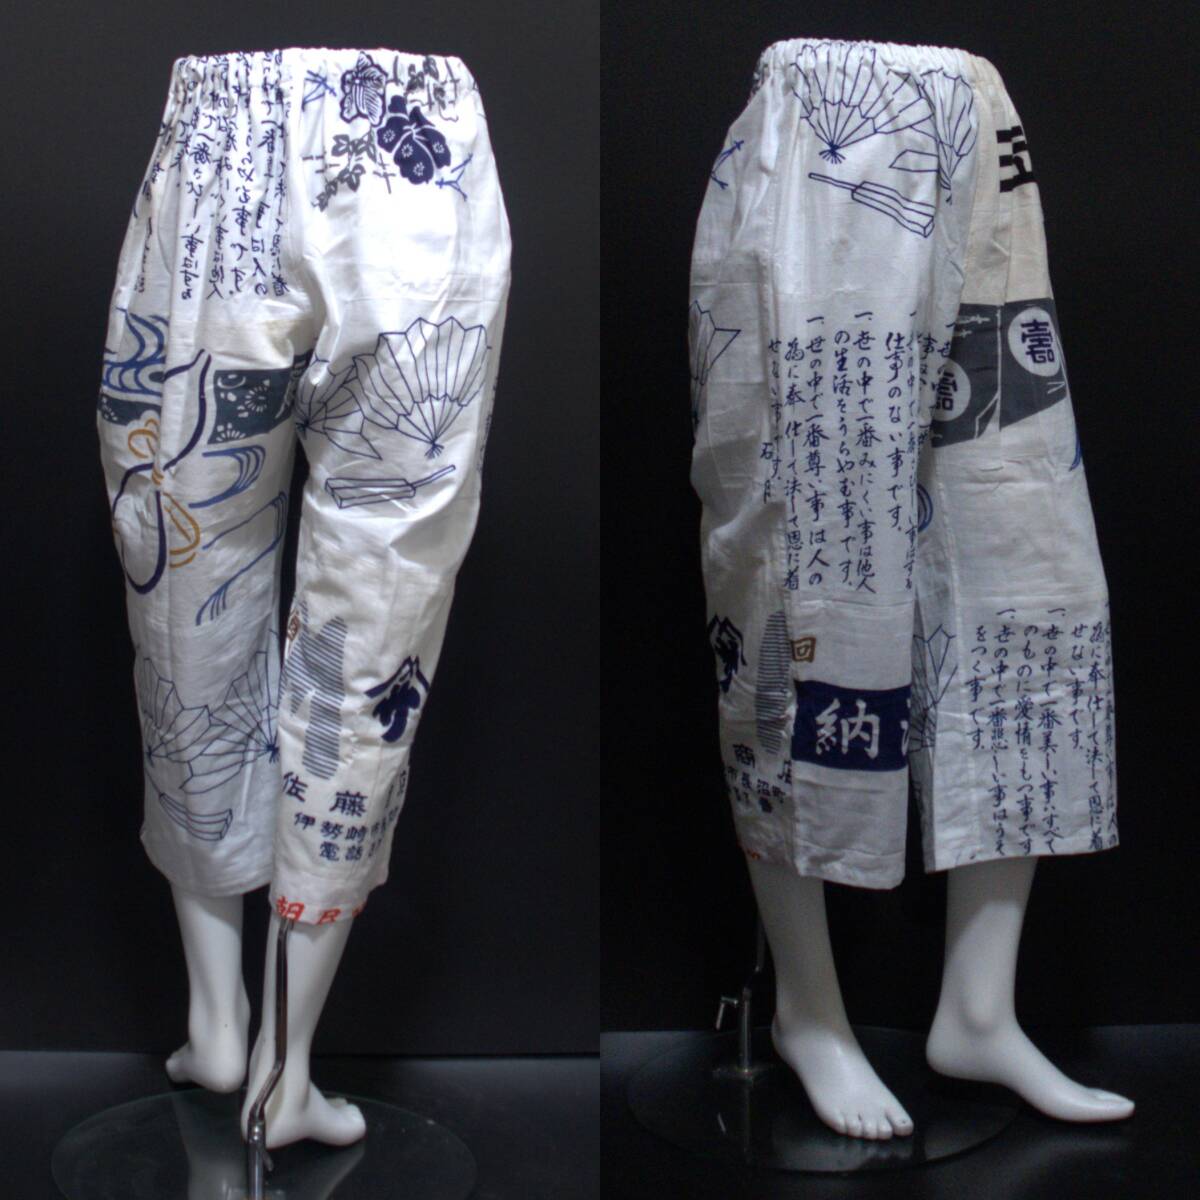  sendai ....8L size king-size men's underpants like Bermuda shorts waste to132. Hitachi Oota Ise city cape city hand made hand .. hand ...H116